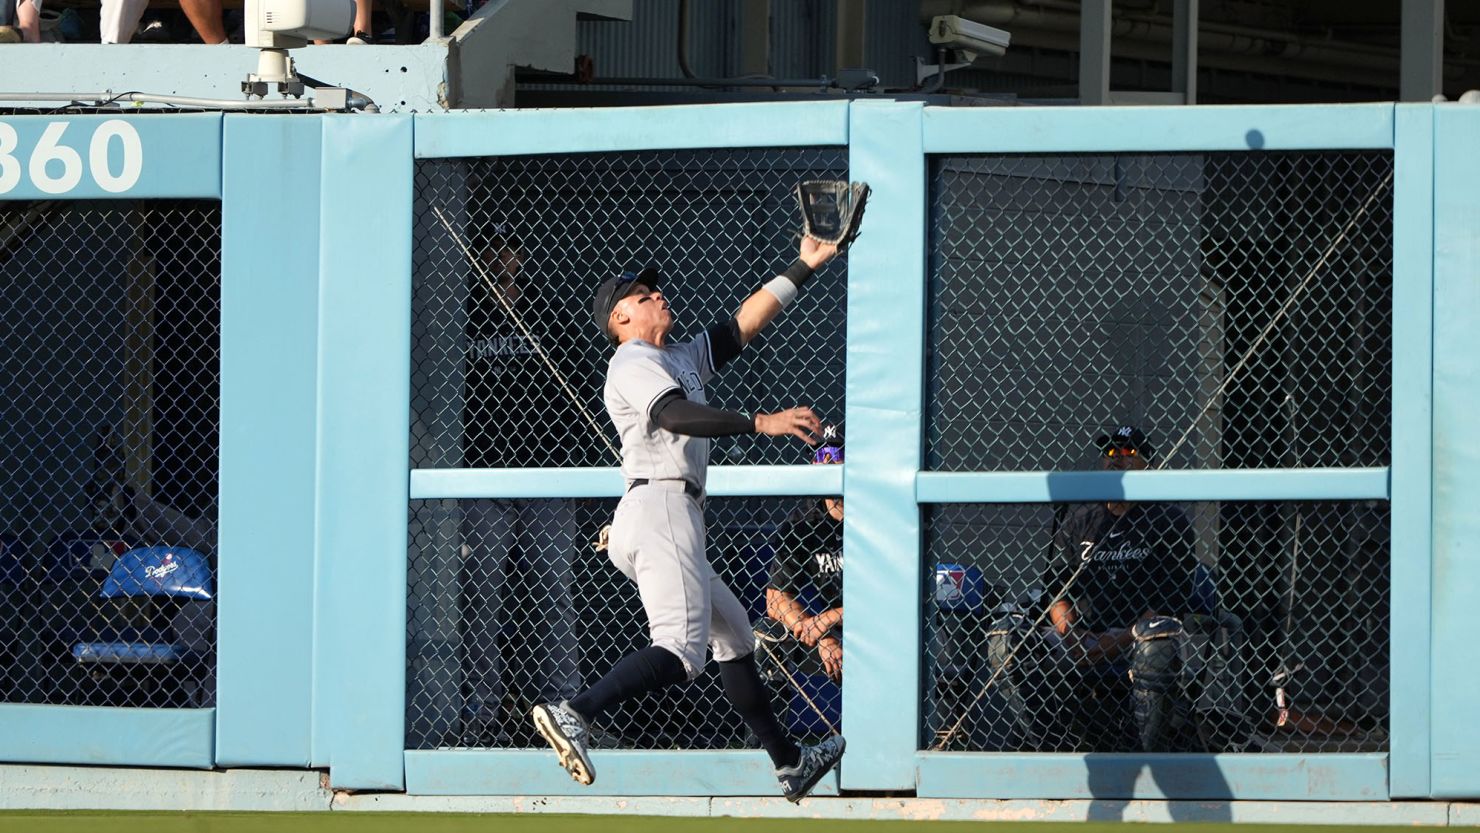 Aaron Judge makes a terrific catch to grab a fly ball by Los Angeles Dodgers' J.D. Martinez in the eighth inning at Dodger Stadium.